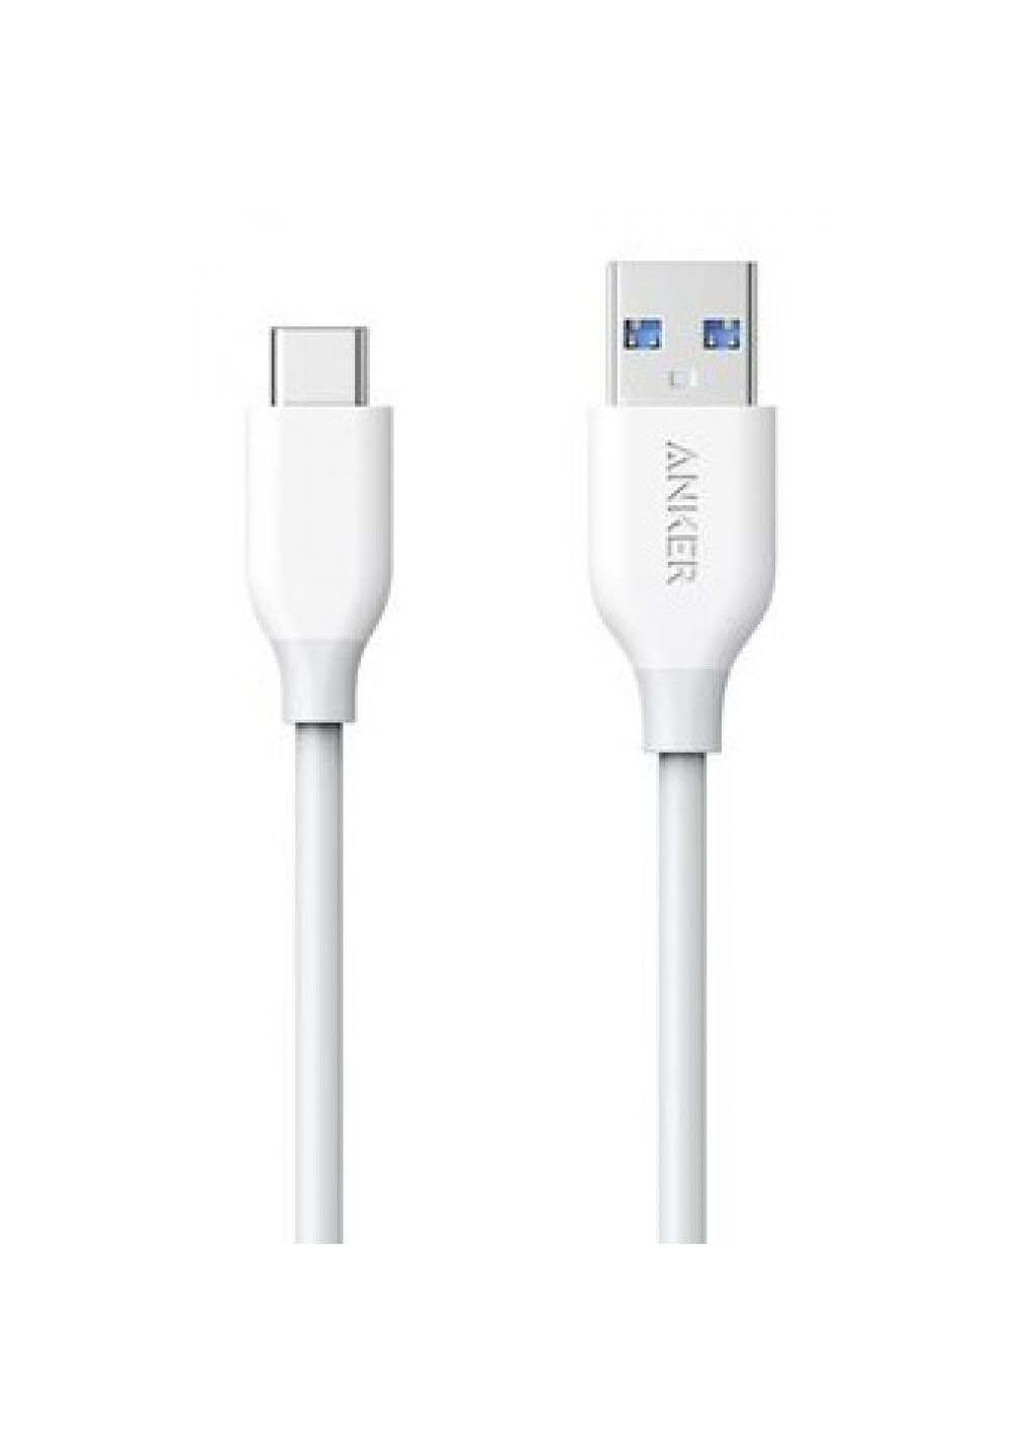 Дата кабель USB 2.0 AM to Type-C 0.9m Powerline Select + White (A8022H21) Anker usb 2.0 am to type-c 0.9m powerline select+ white (239382787)